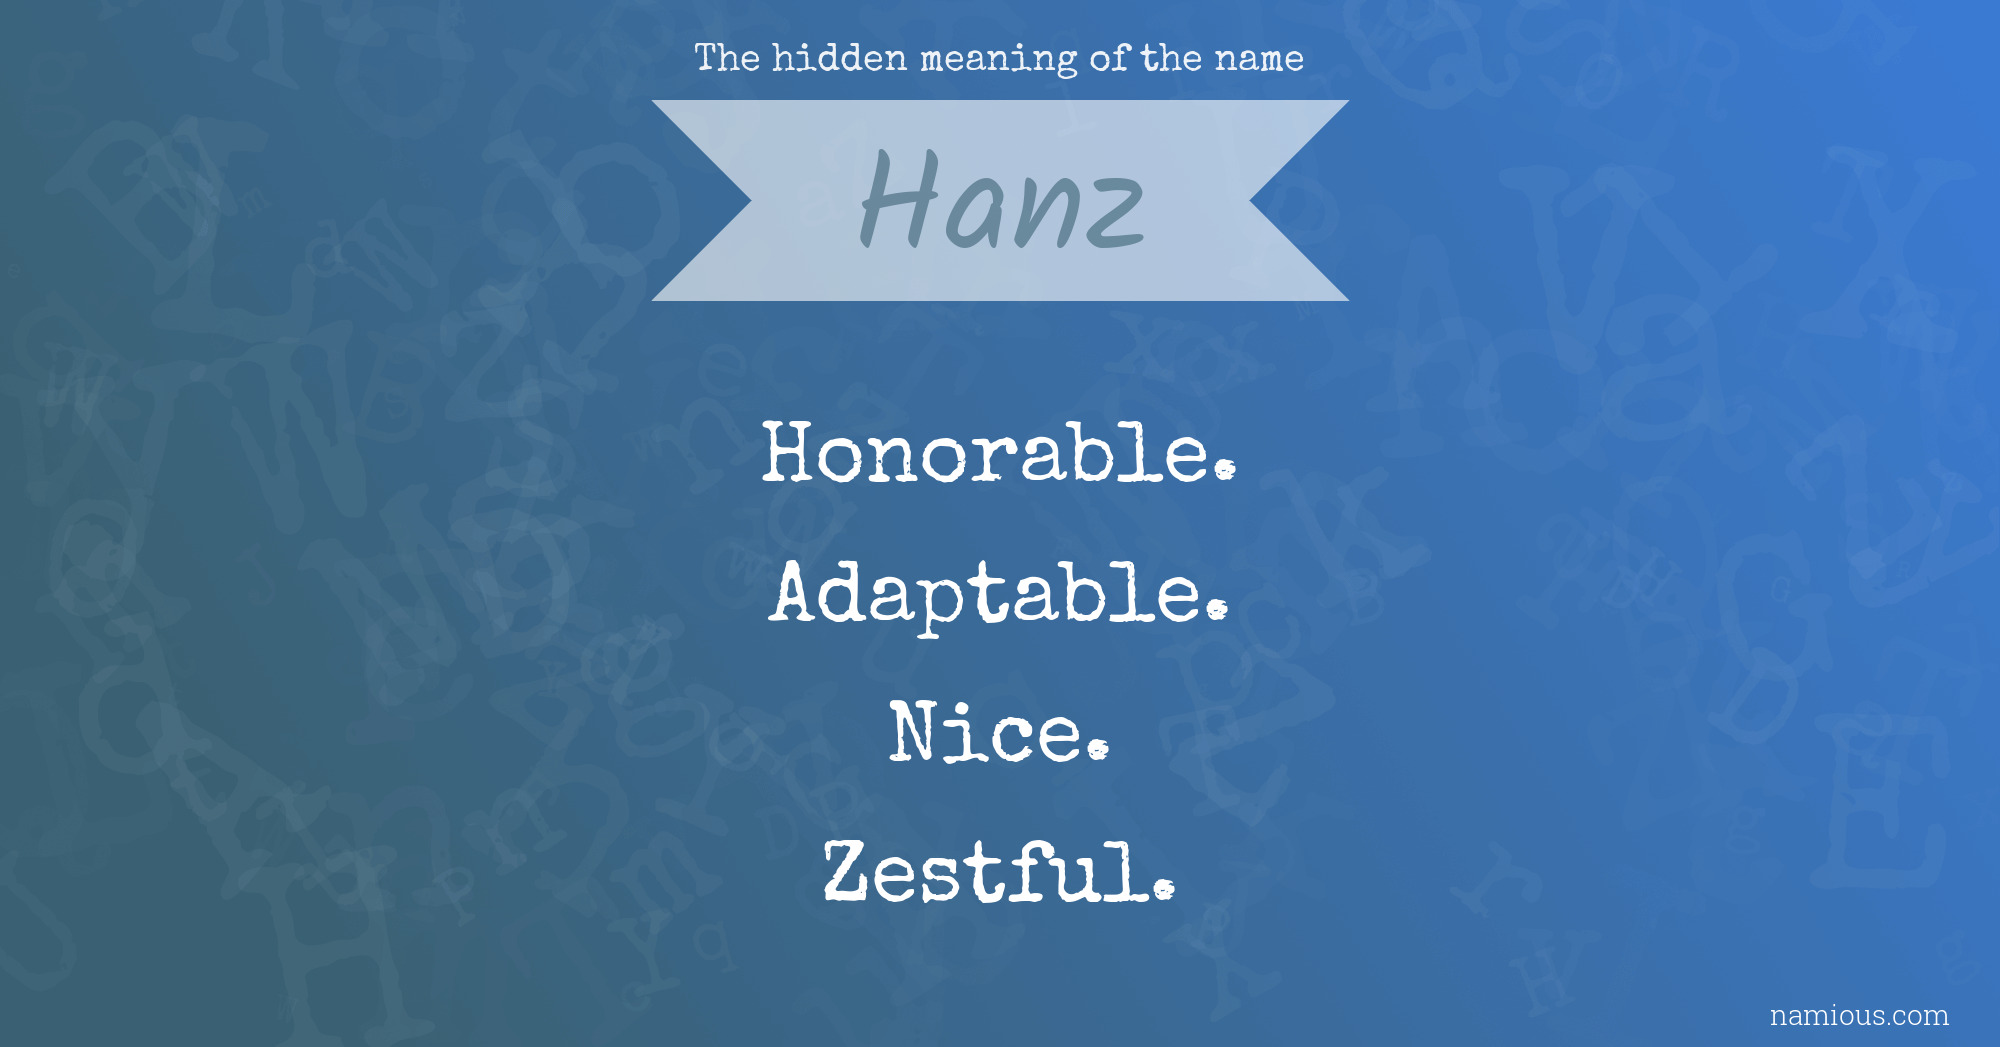 The hidden meaning of the name Hanz